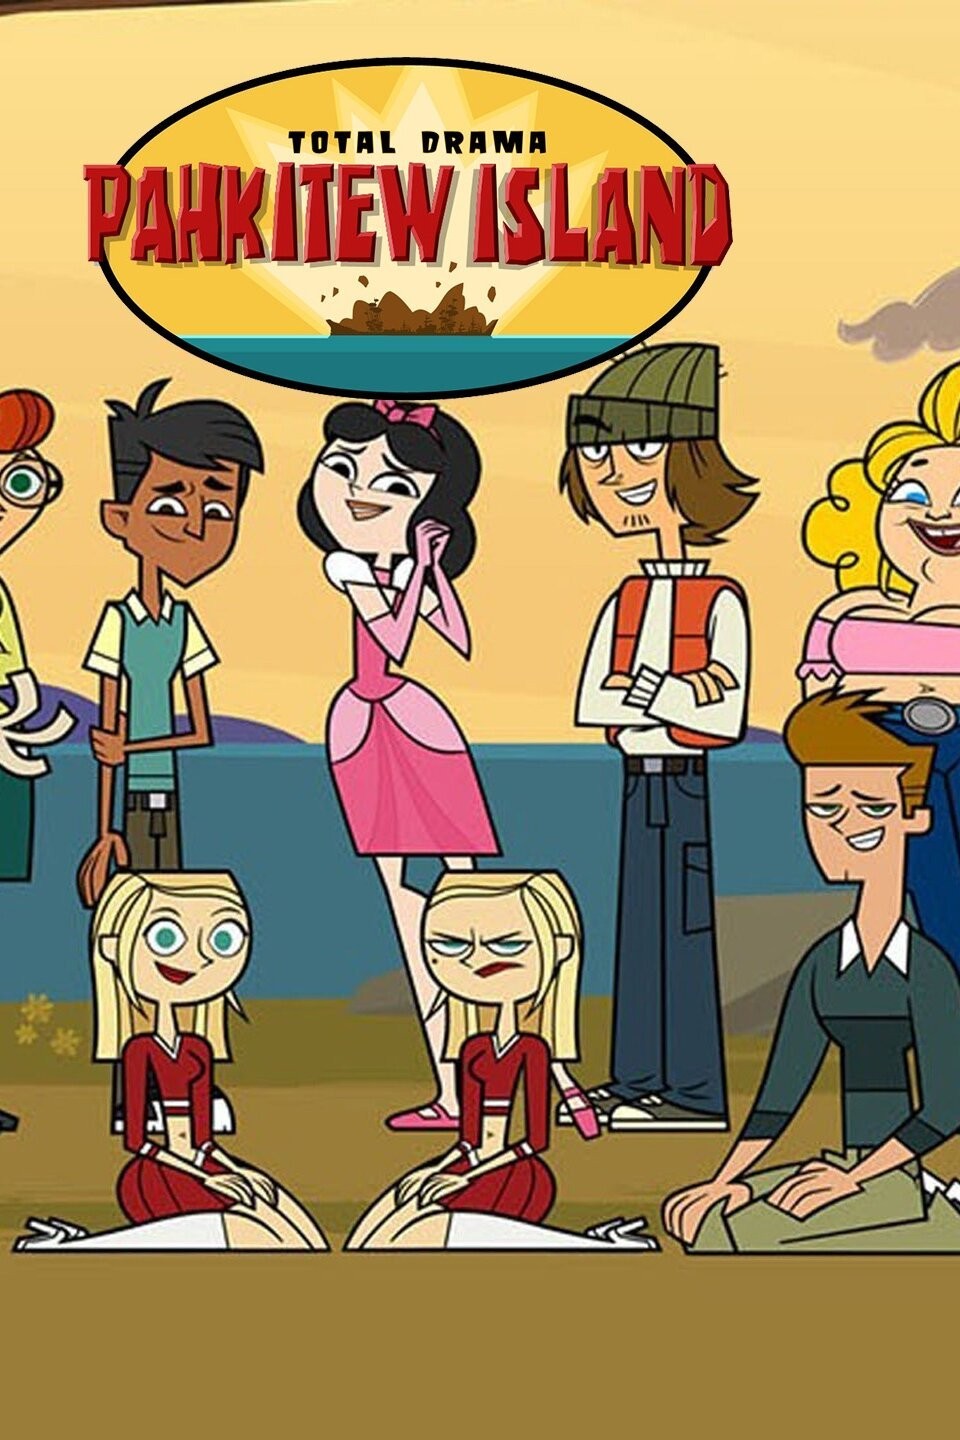 Me and my friends decided to cast actors we think would be a good fit for  the first season : r/Totaldrama